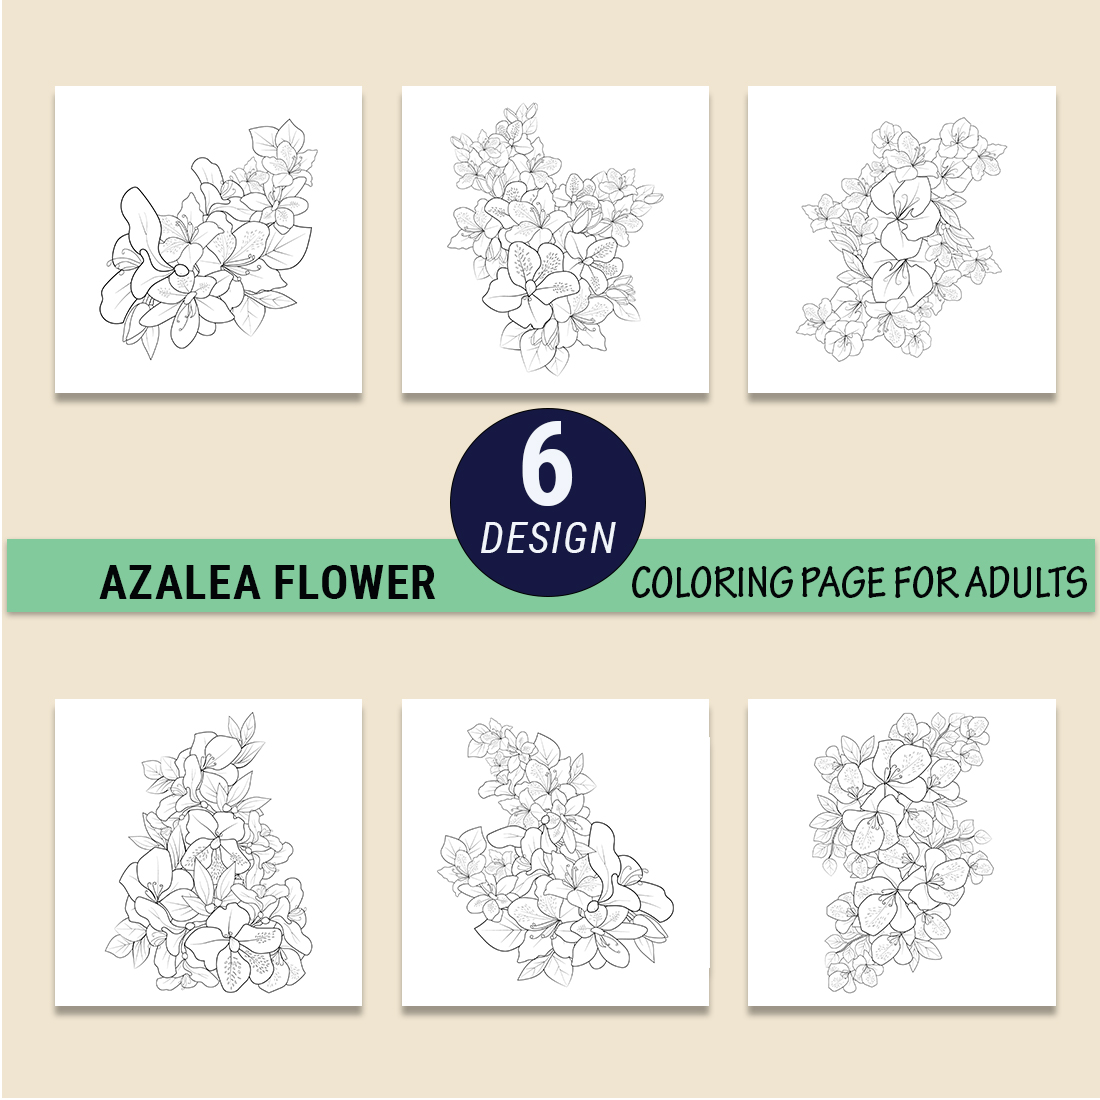 outline azalea drawing, botanical azalea drawing, the national flower of Nepal drawing, rhododendron sketch preview image.